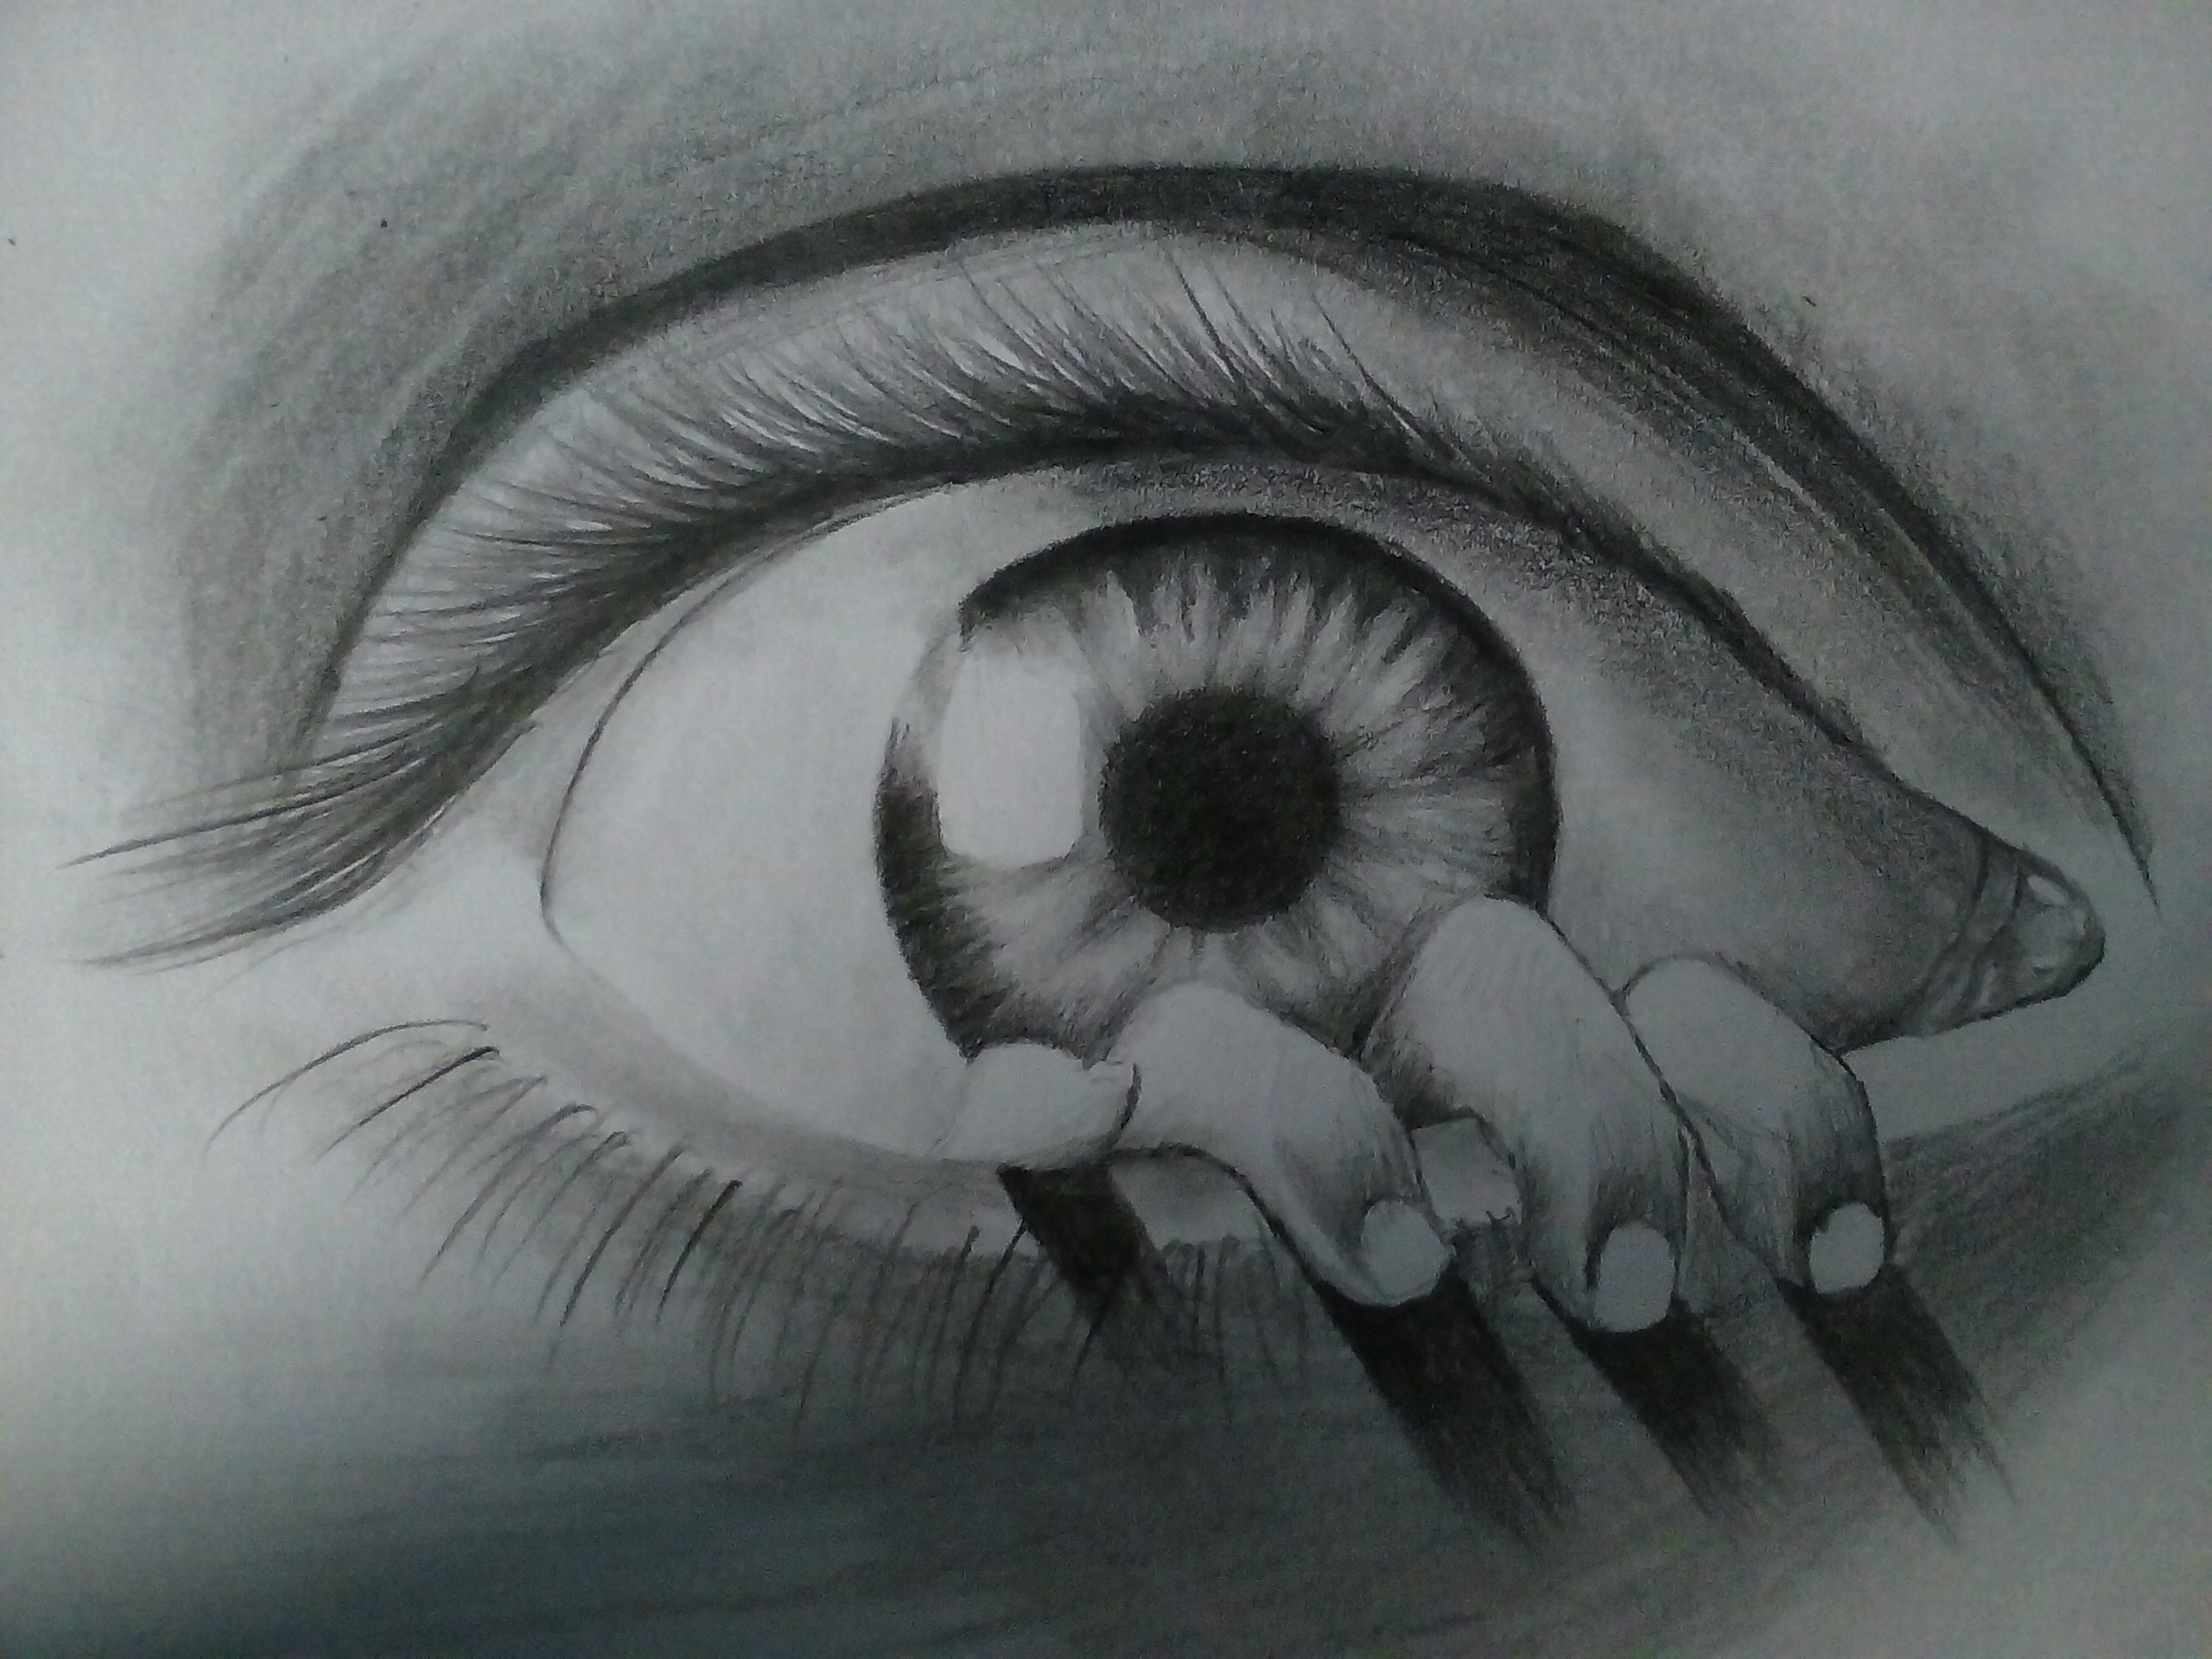 Why do some people love drawing eyes? - Quora